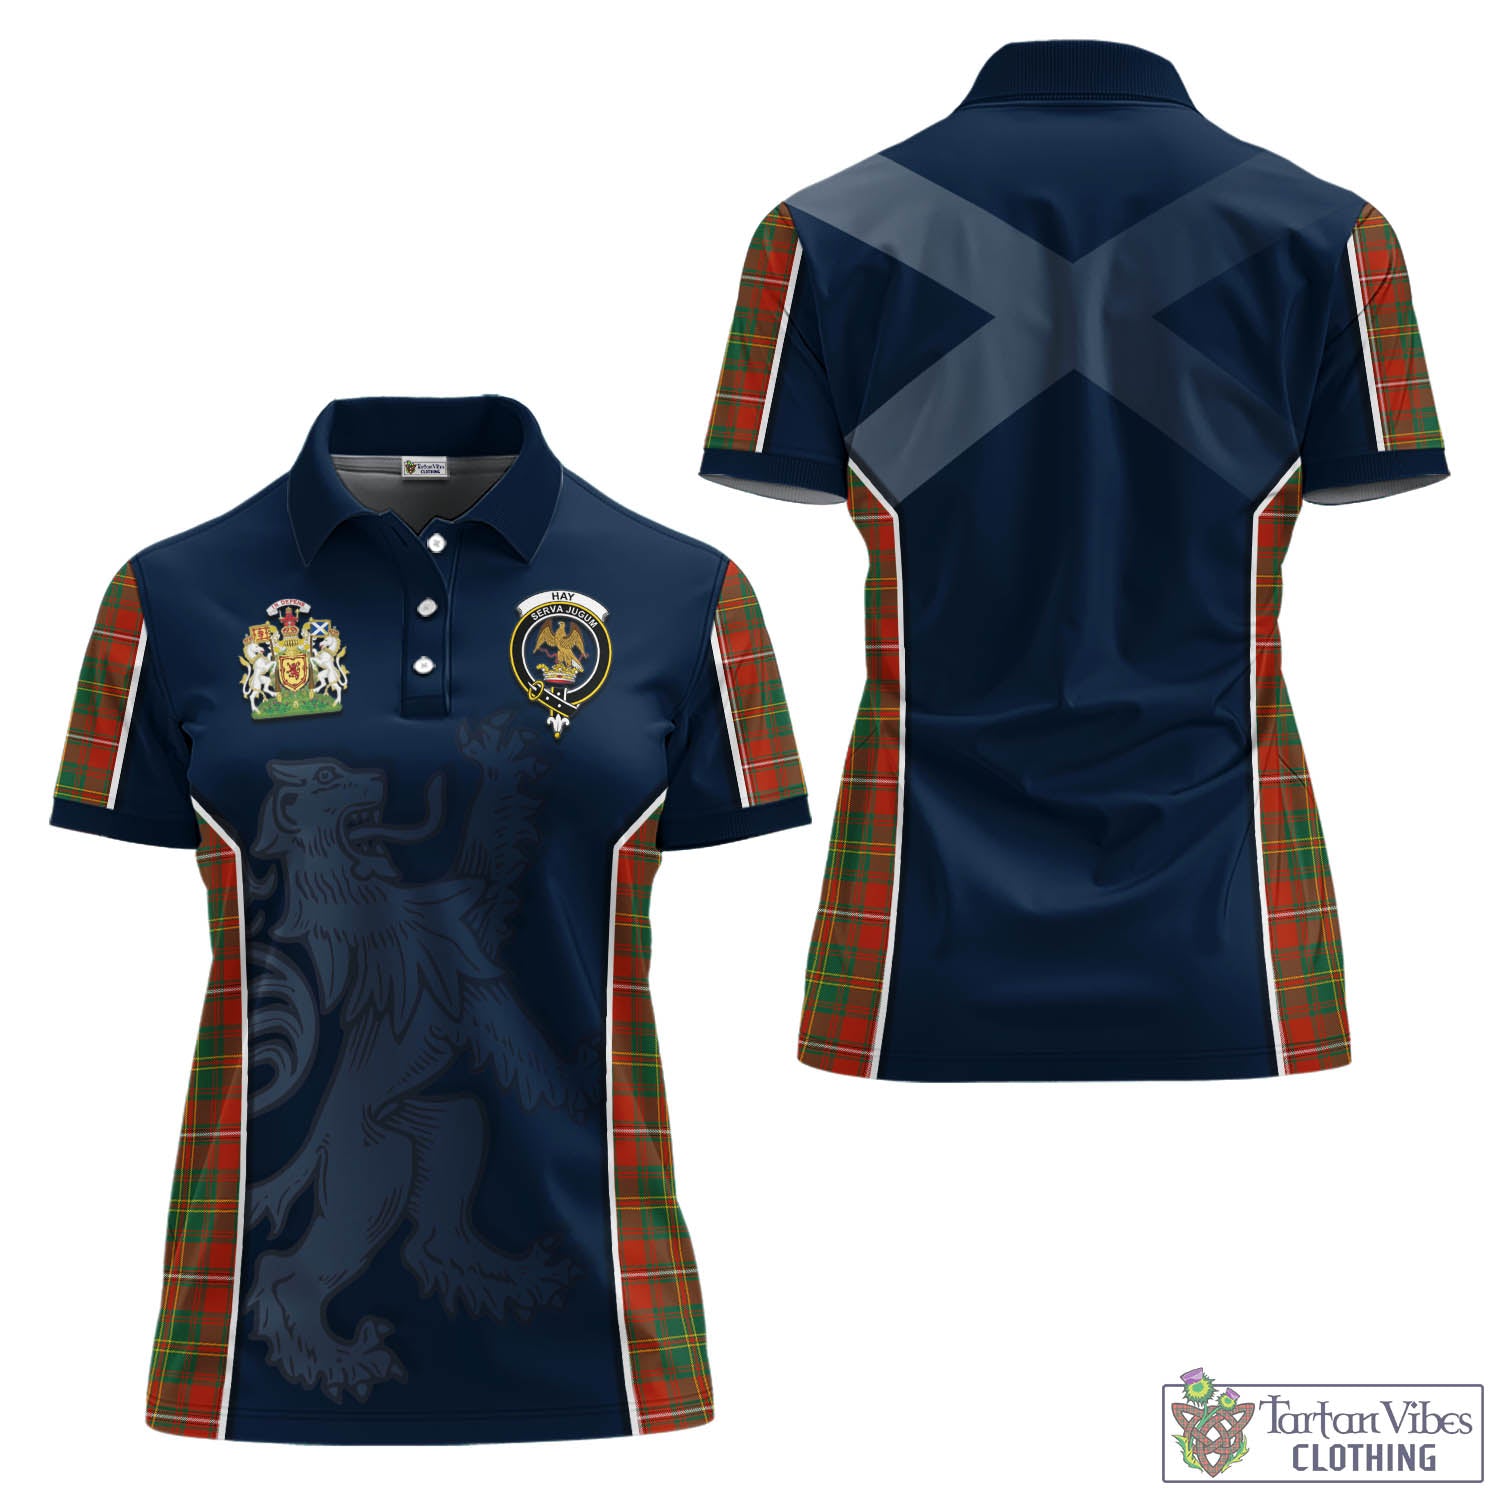 Tartan Vibes Clothing Hay Ancient Tartan Women's Polo Shirt with Family Crest and Lion Rampant Vibes Sport Style